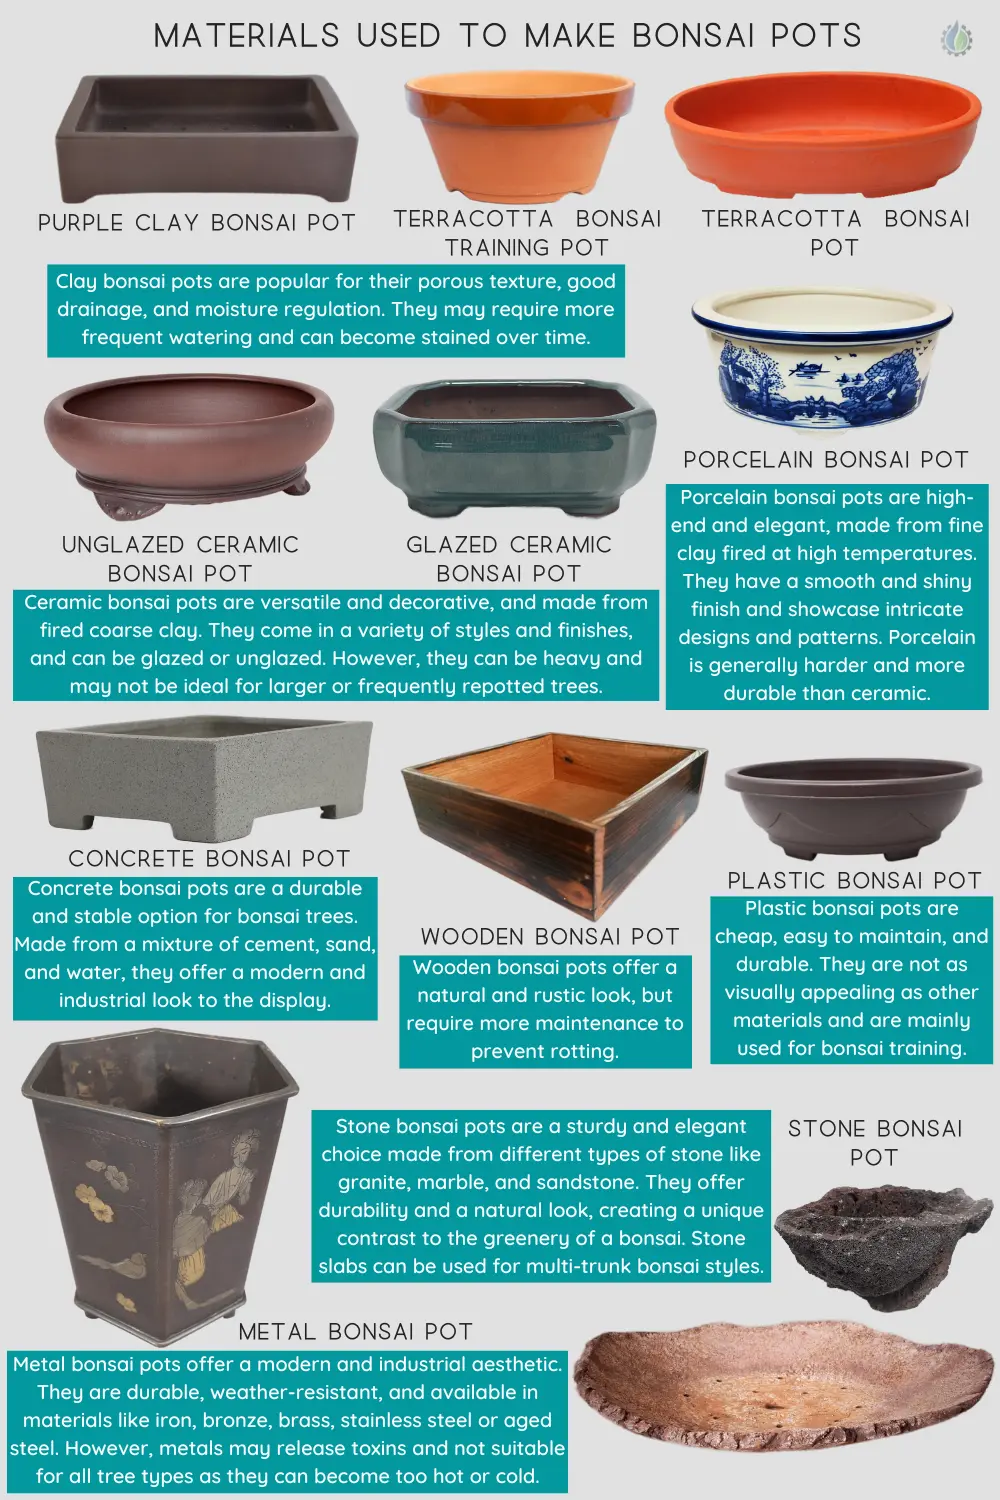 What are bonsai pots made of? materials used to make bonsai pots